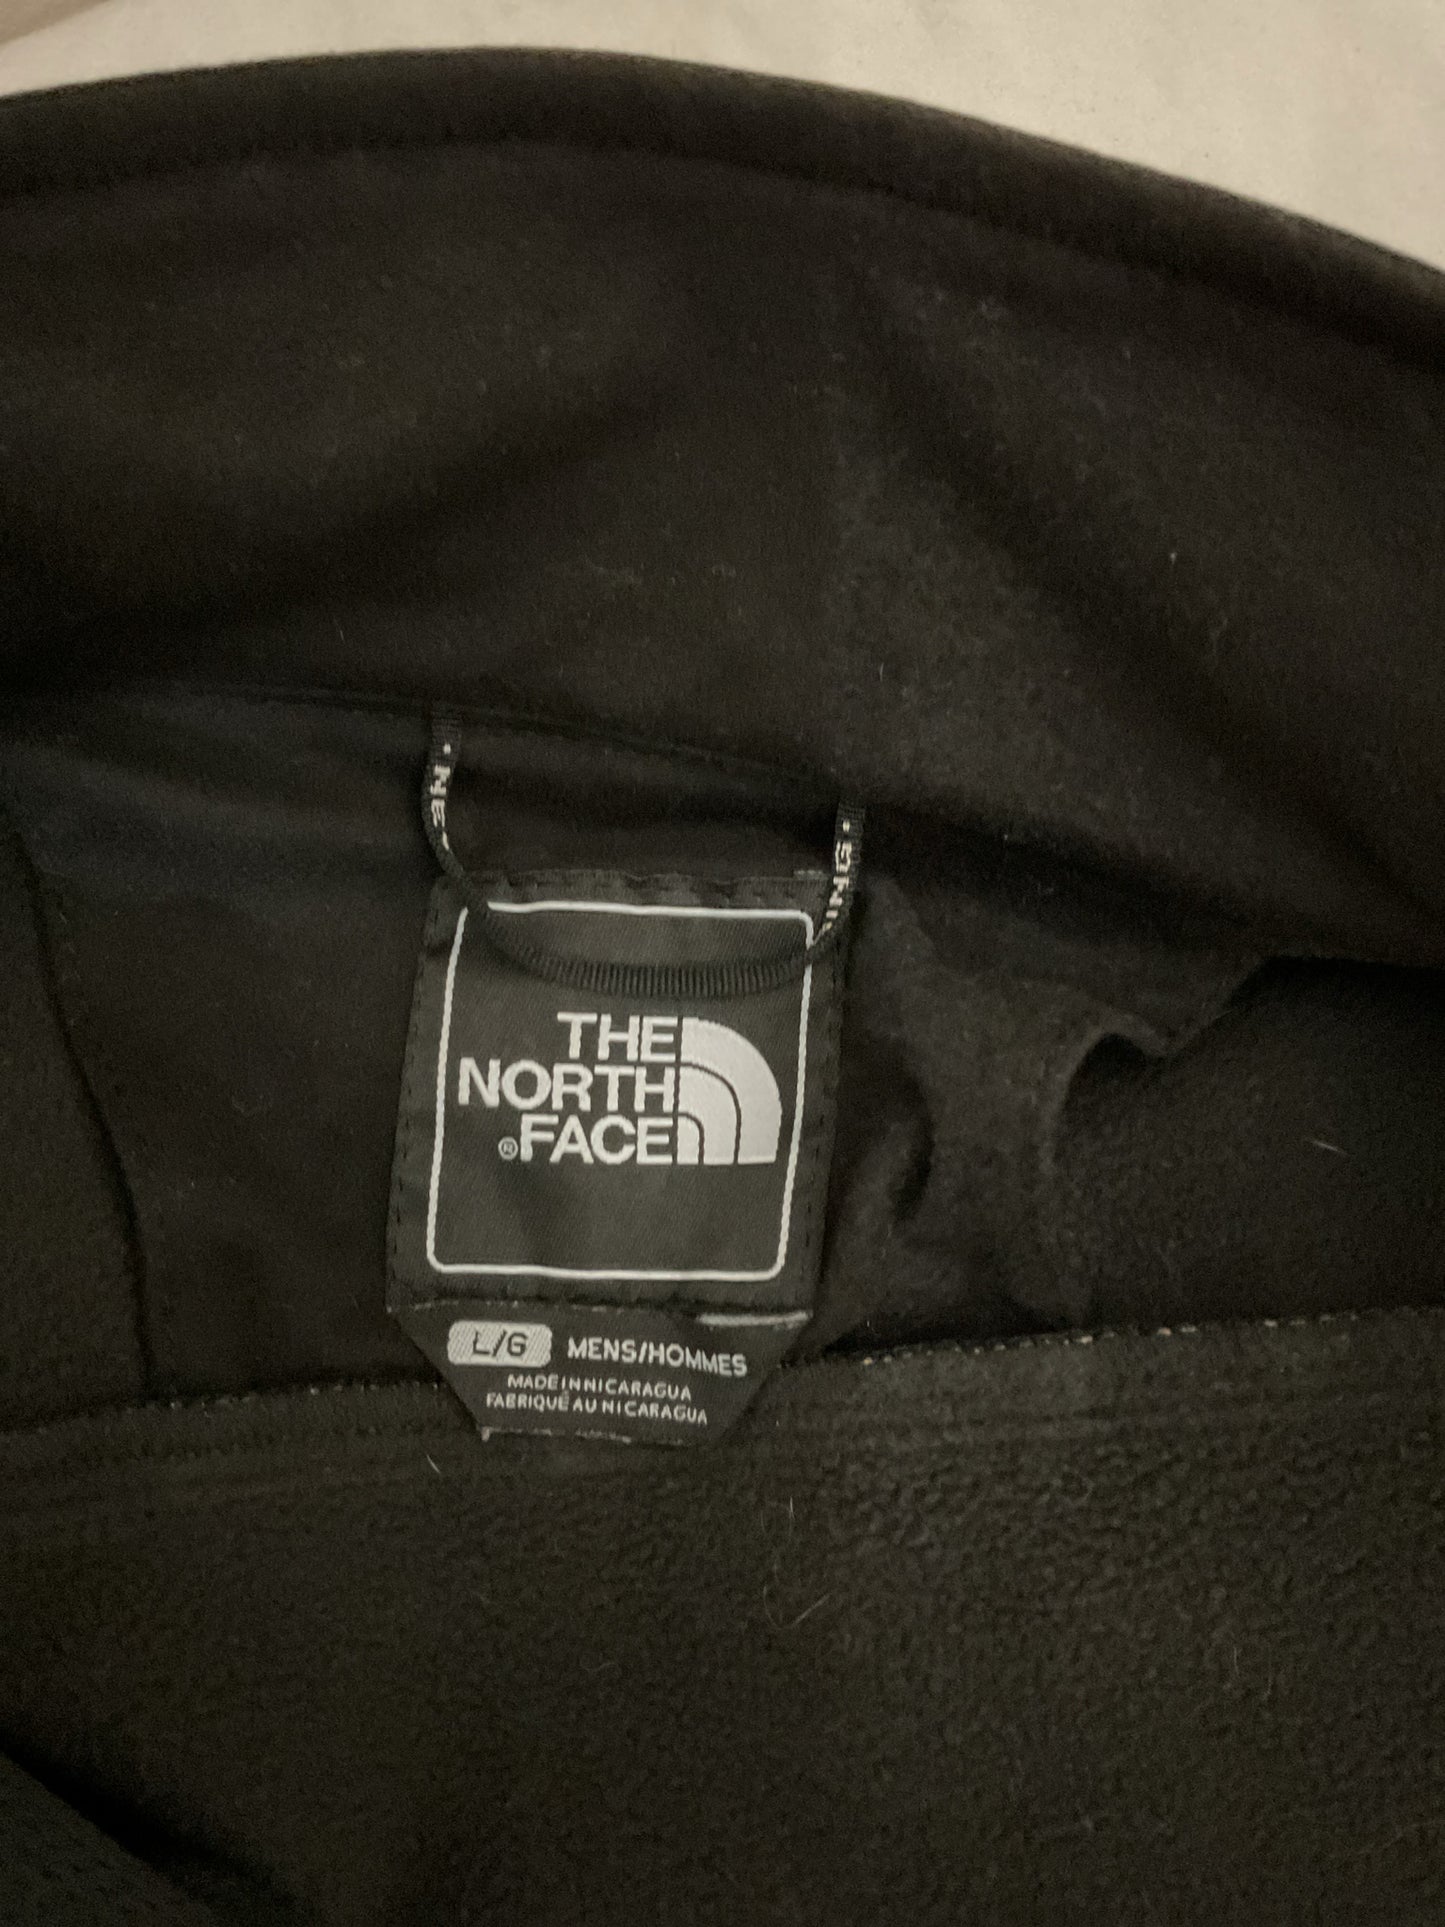 The North Face Softshell Jacket Men's L